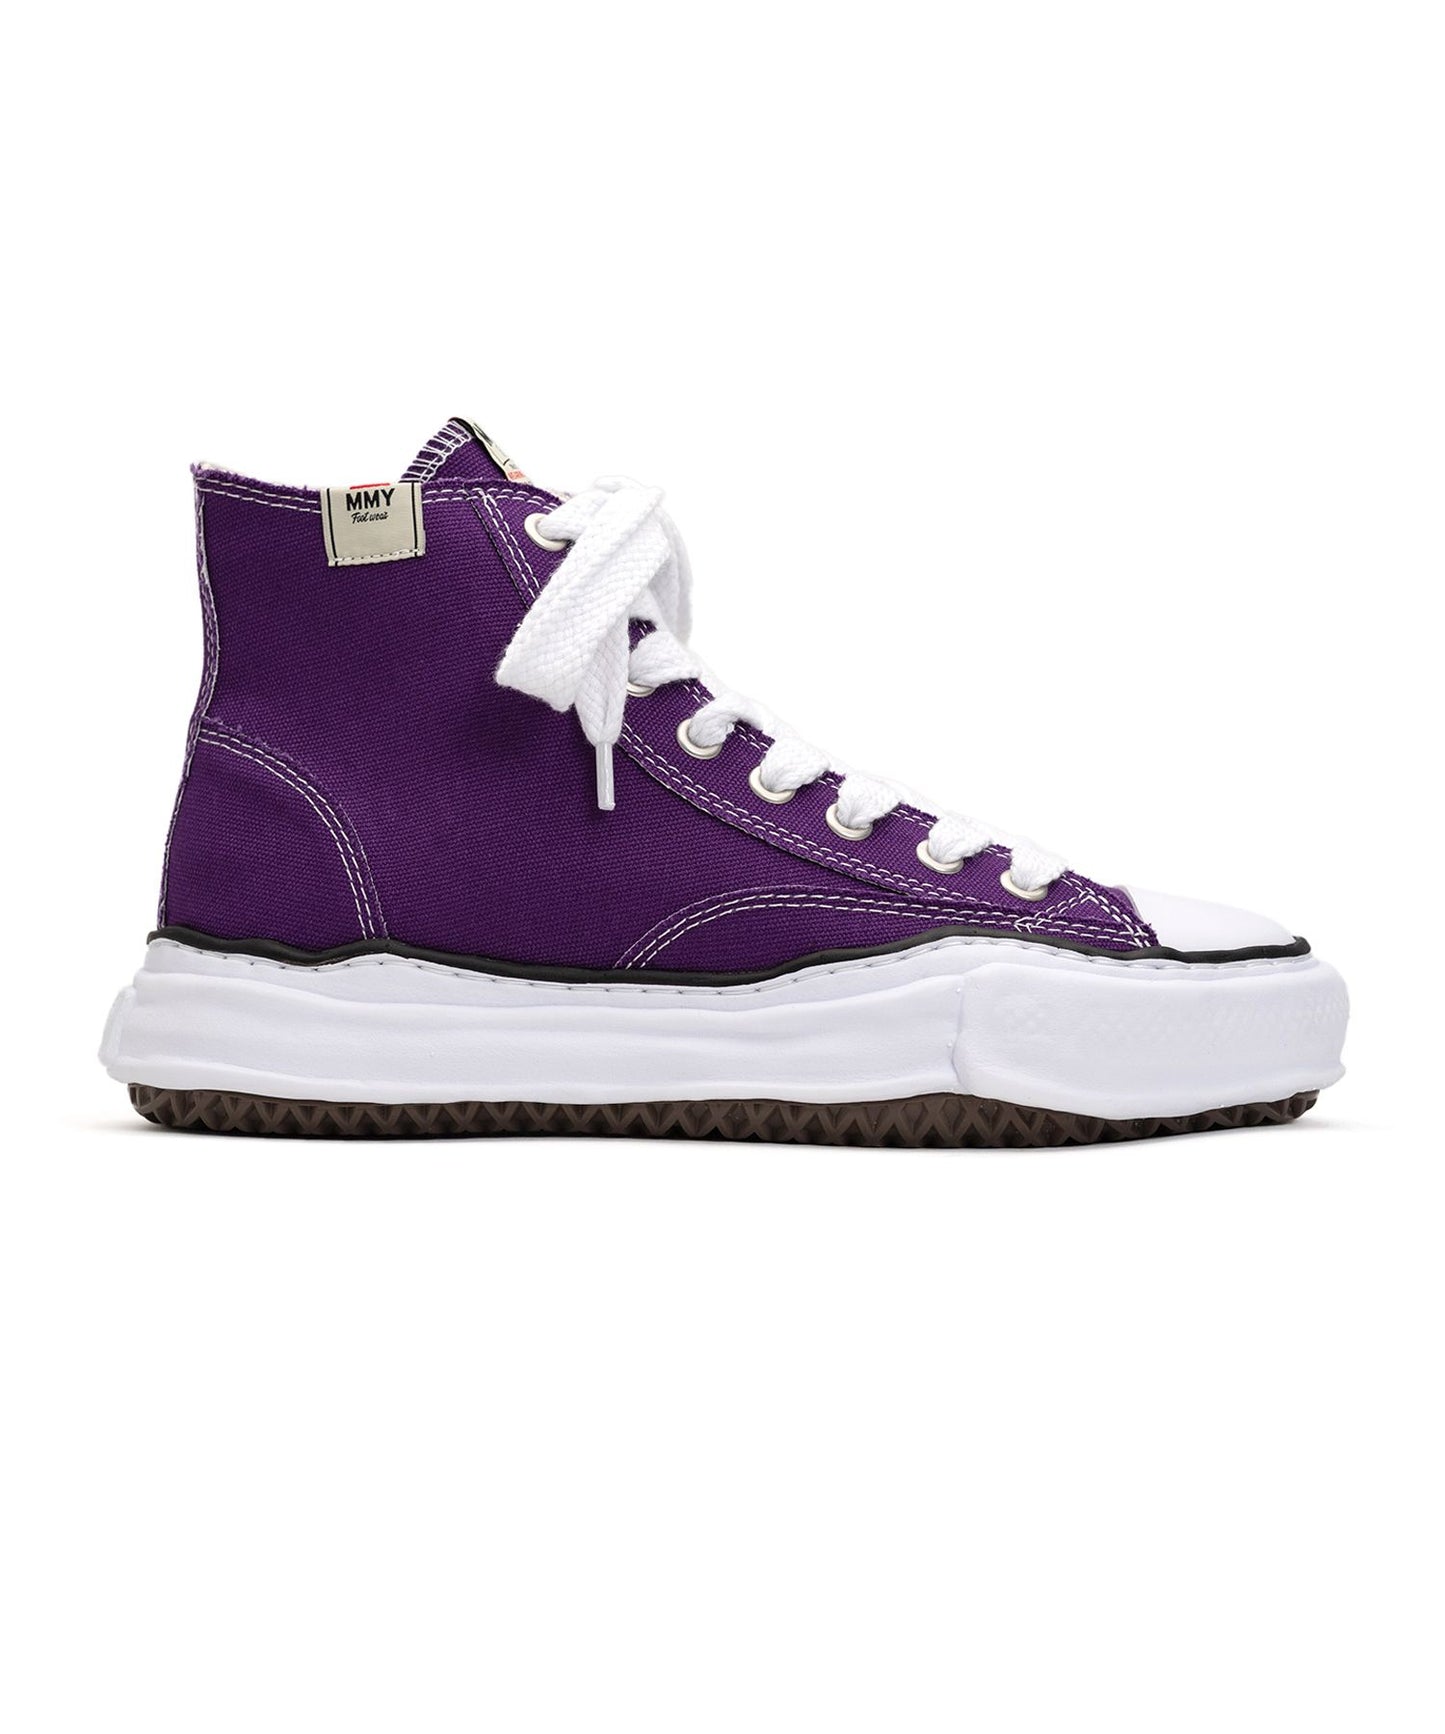 PETERSON 23 OG SOLE CANVAS HIGH TOP